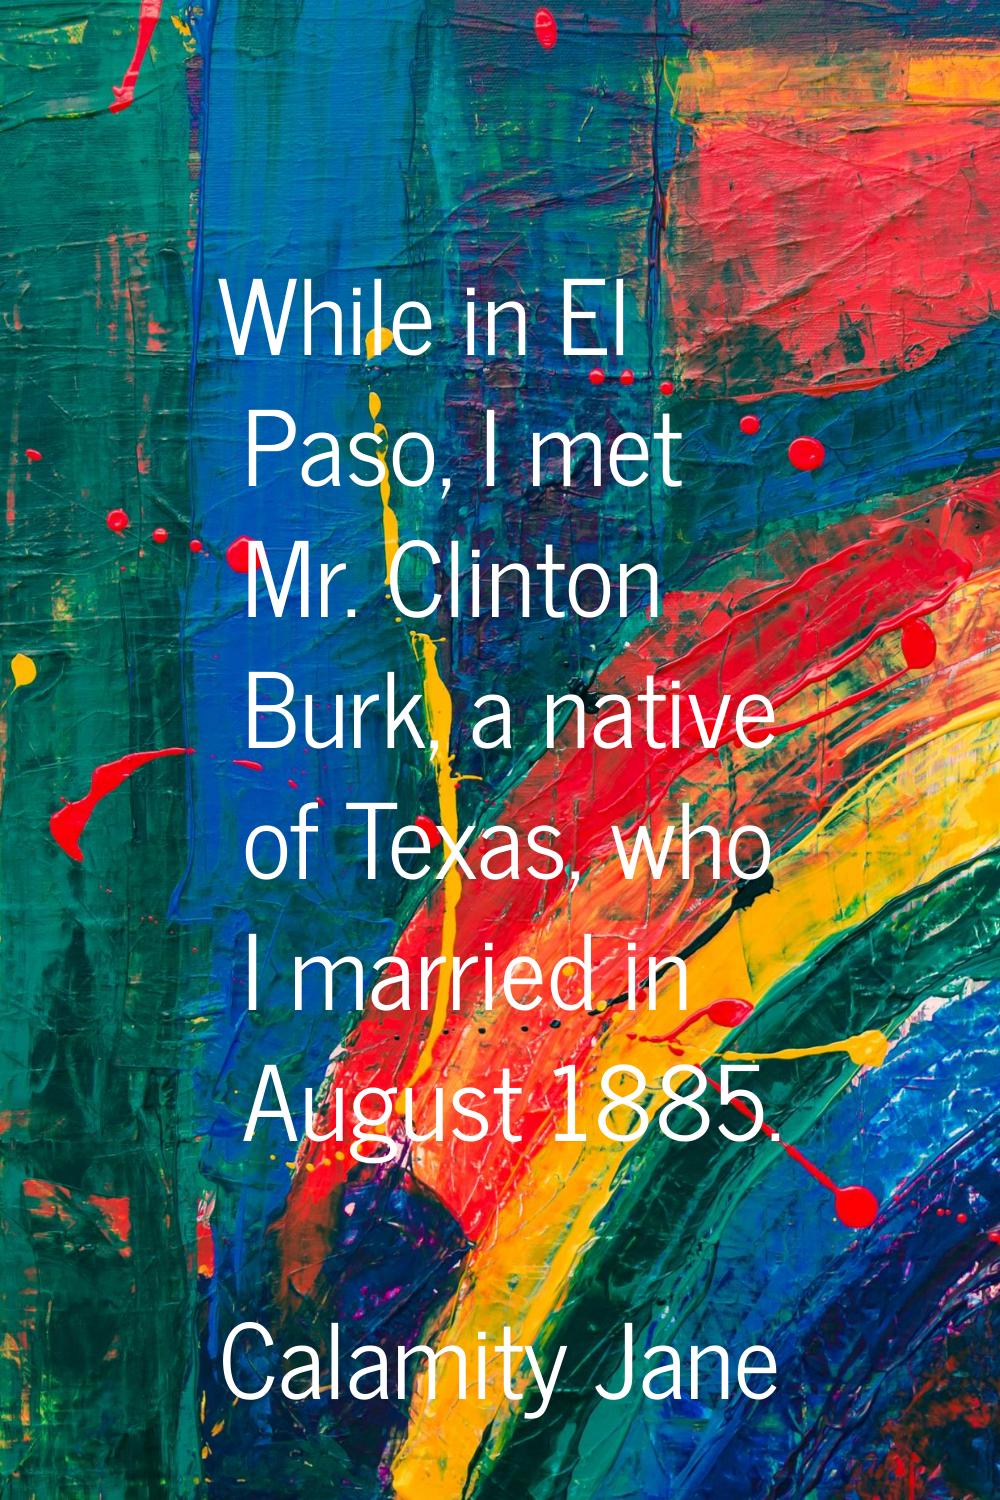 While in El Paso, I met Mr. Clinton Burk, a native of Texas, who I married in August 1885.